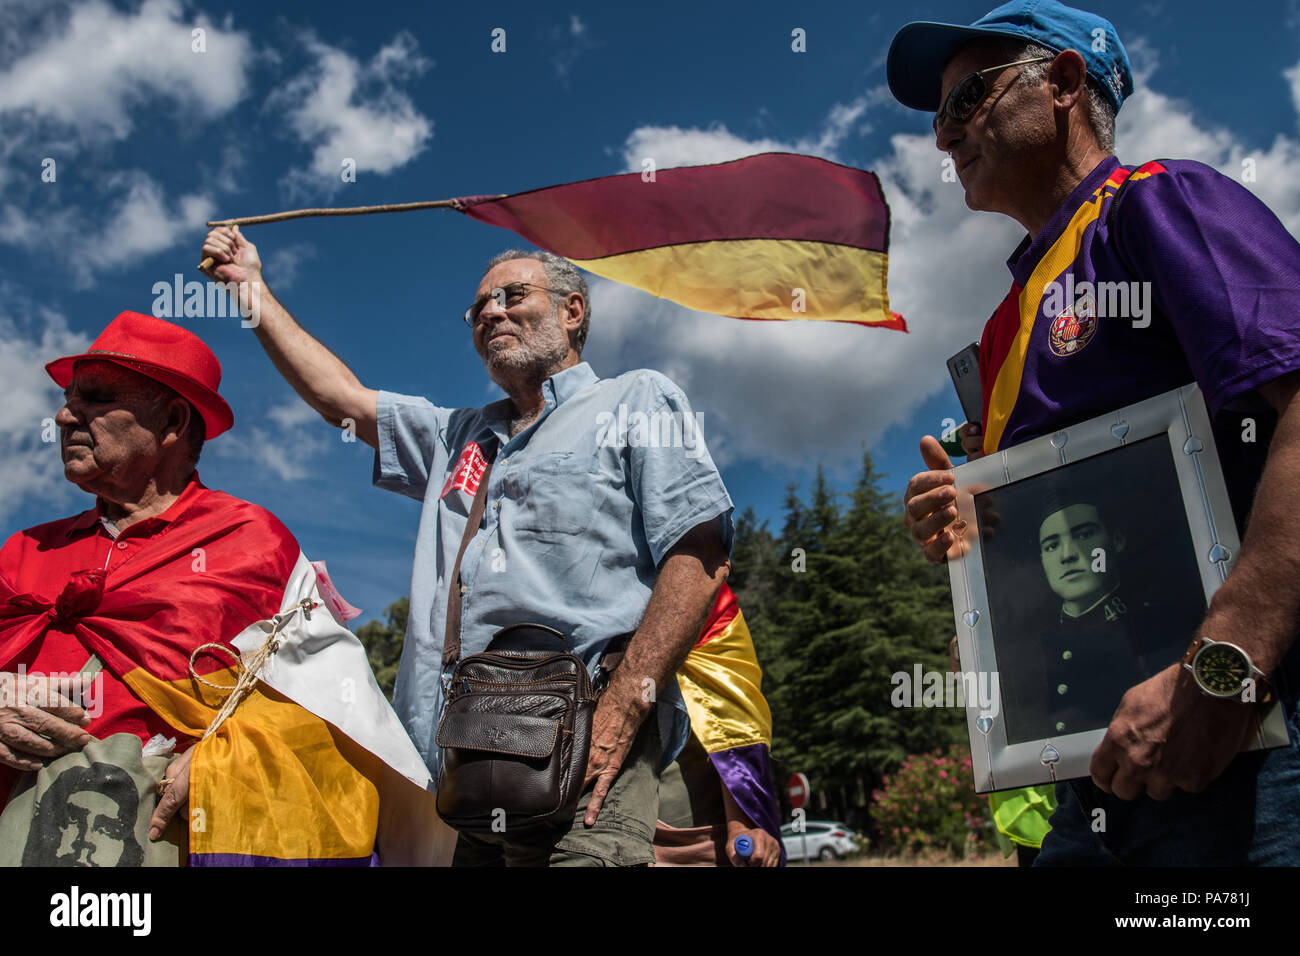 San Lorenzo del Escorial, Madrid, Spain. 21st July 2018. People with republican flags protesting at the entrance of 'Valle de los Caidos' (Valley of the Fallen) monument to demand the removal of Franco and Primo de Rivera's remains. A man carries a picture of his grandfather who was killed by Franco's army in Malaga in the Spanish Civil War, in San Lorenzo del Escorial, Madrid, Spain. Credit: Marcos del Mazo/Almy Live News Stock Photo